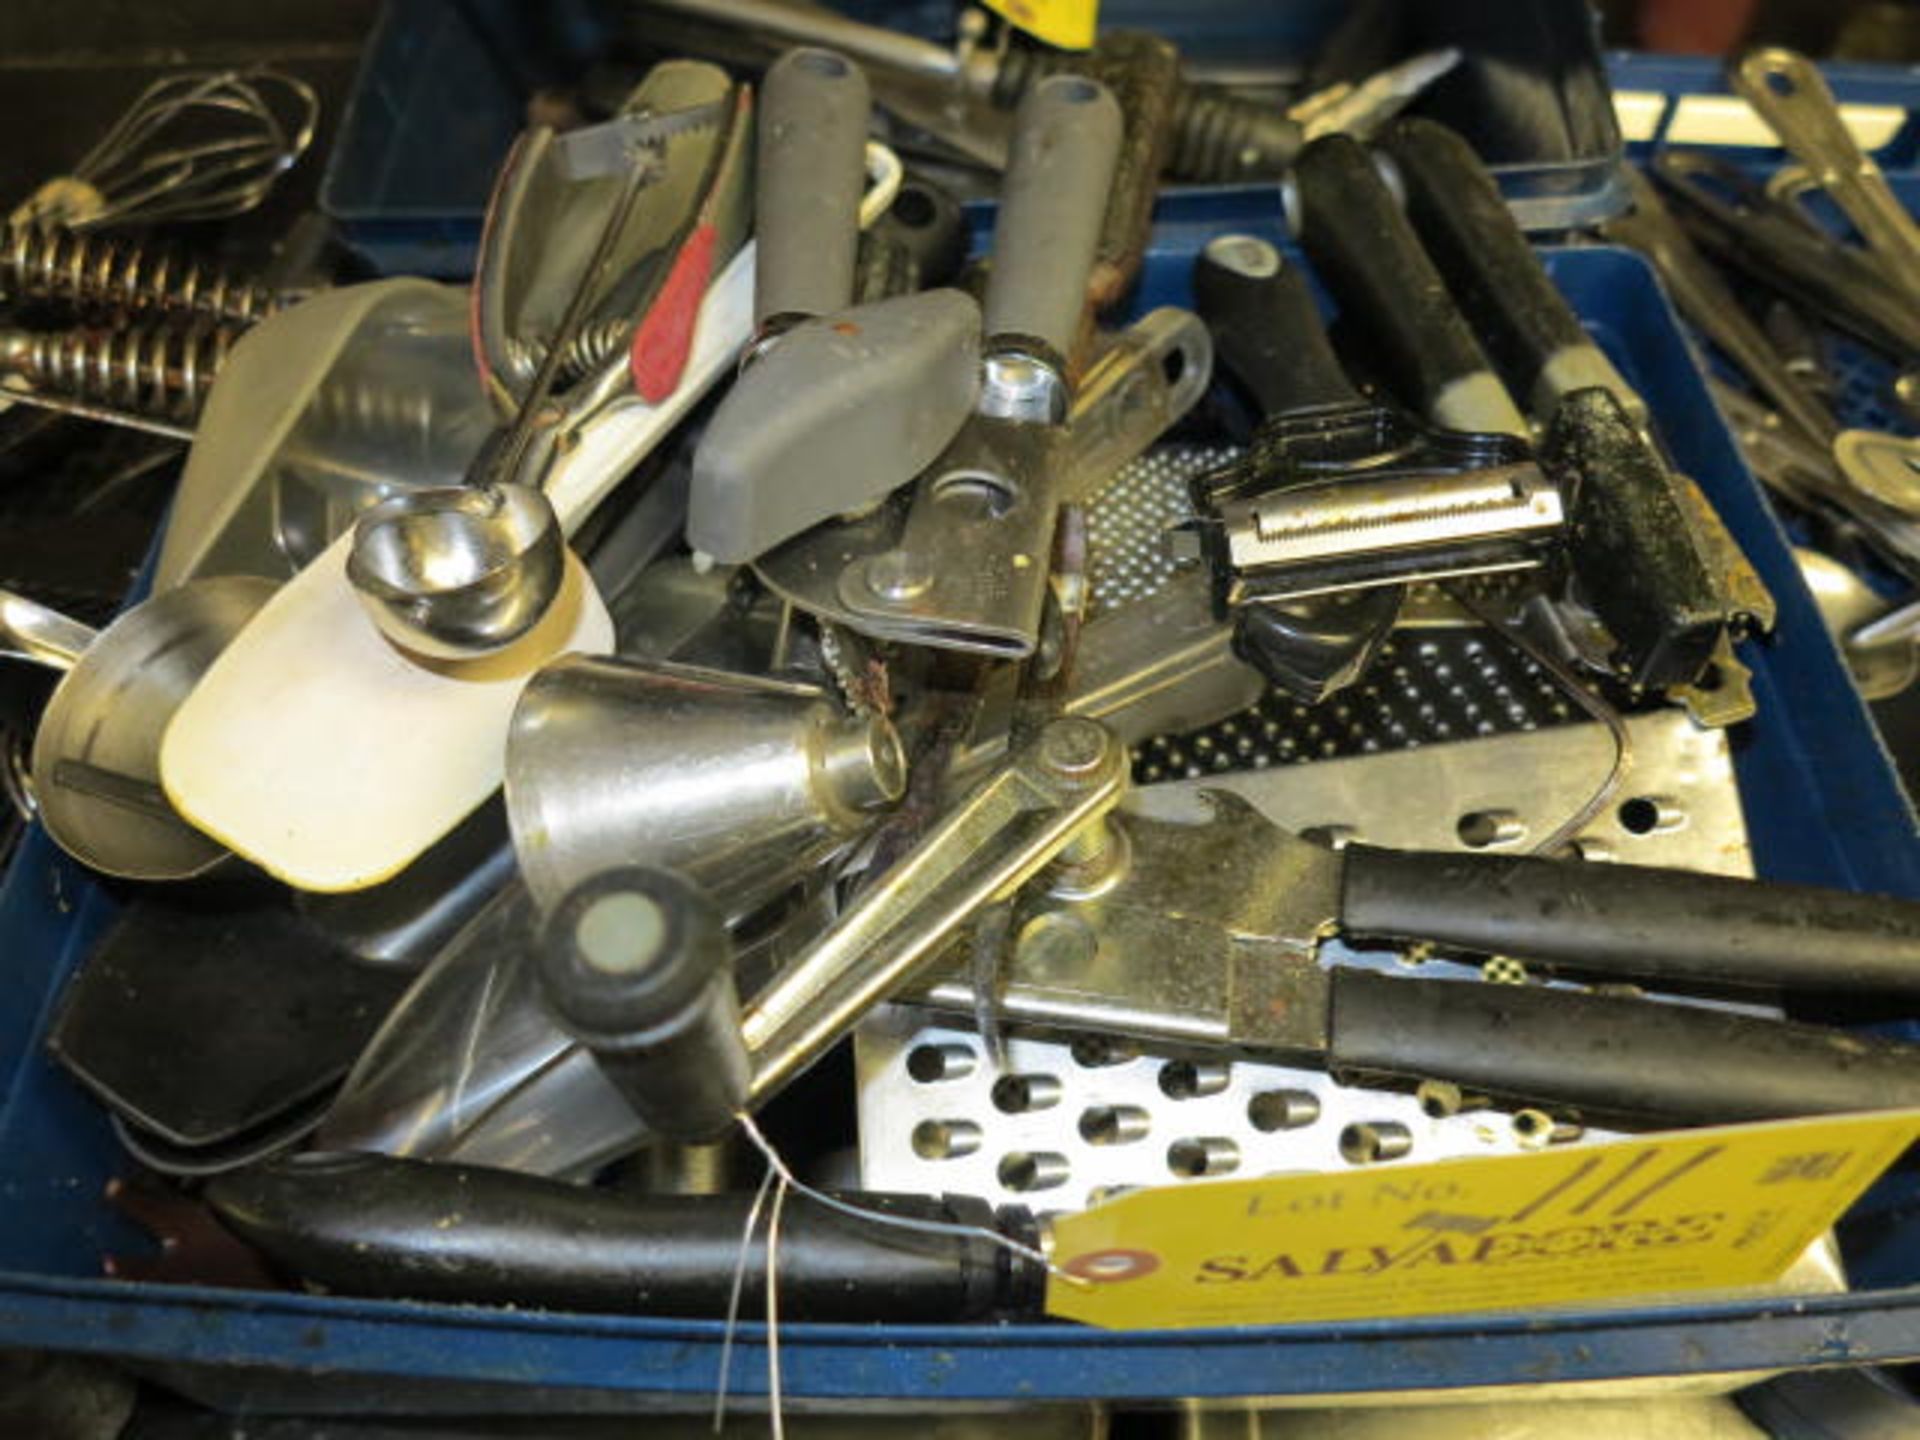 Lot Can Openers, Graters